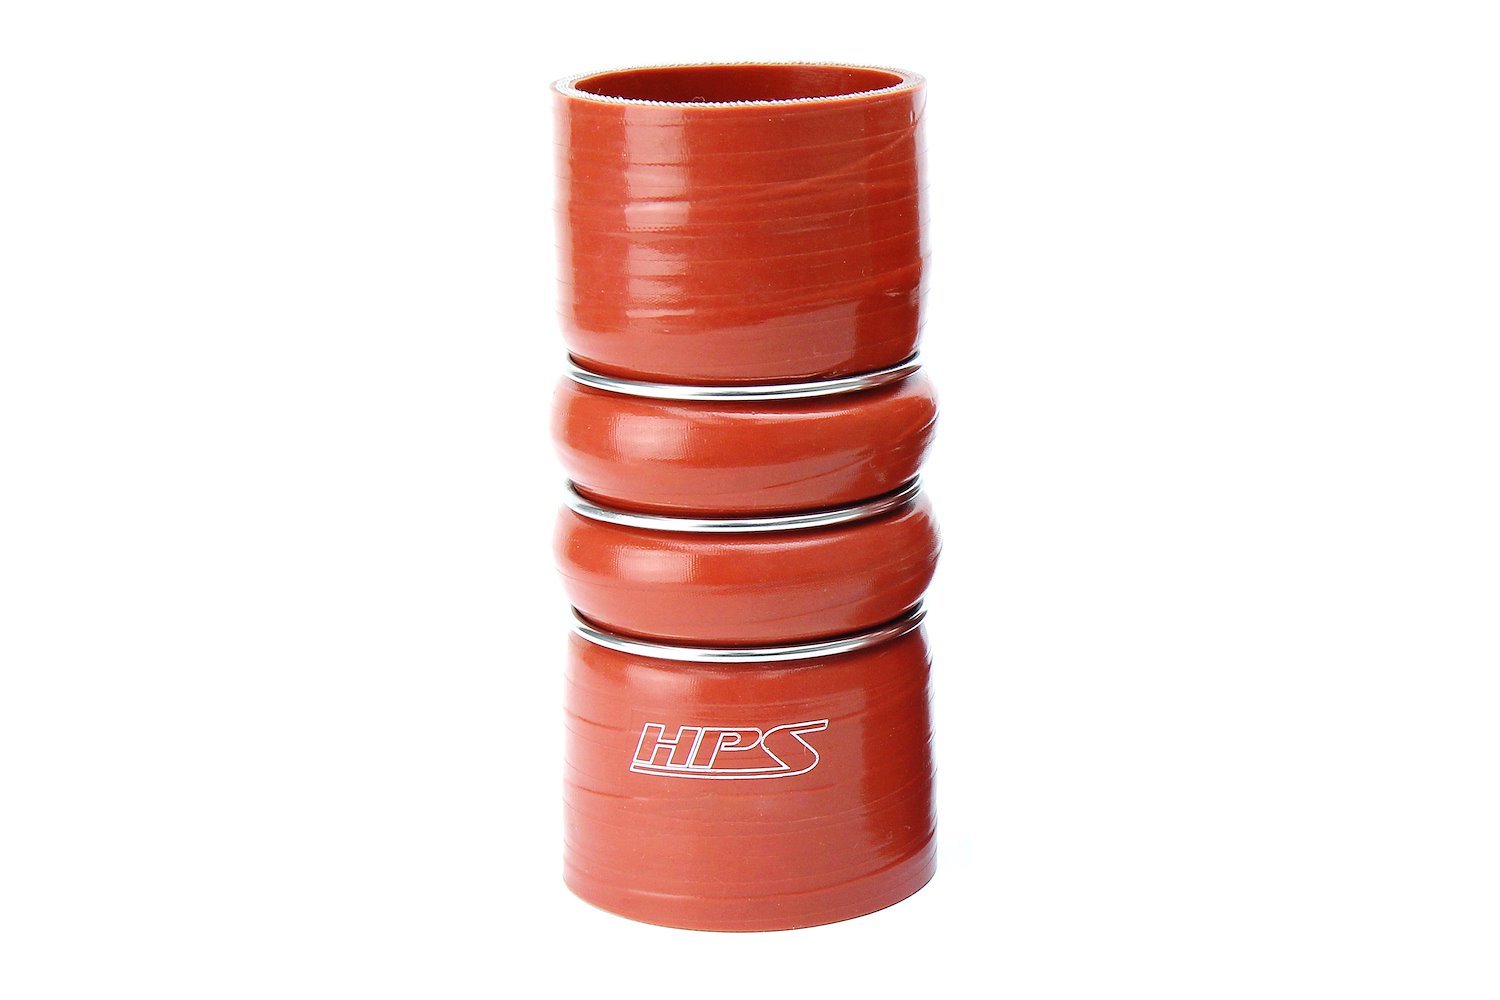 CAC-250-HOT Silicone CAC Hose, Silicone CAC Hump Hose Hot, High-Temp 4-Ply Aramid Reinforced, 2-1/2 in. ID, 6 in. Long